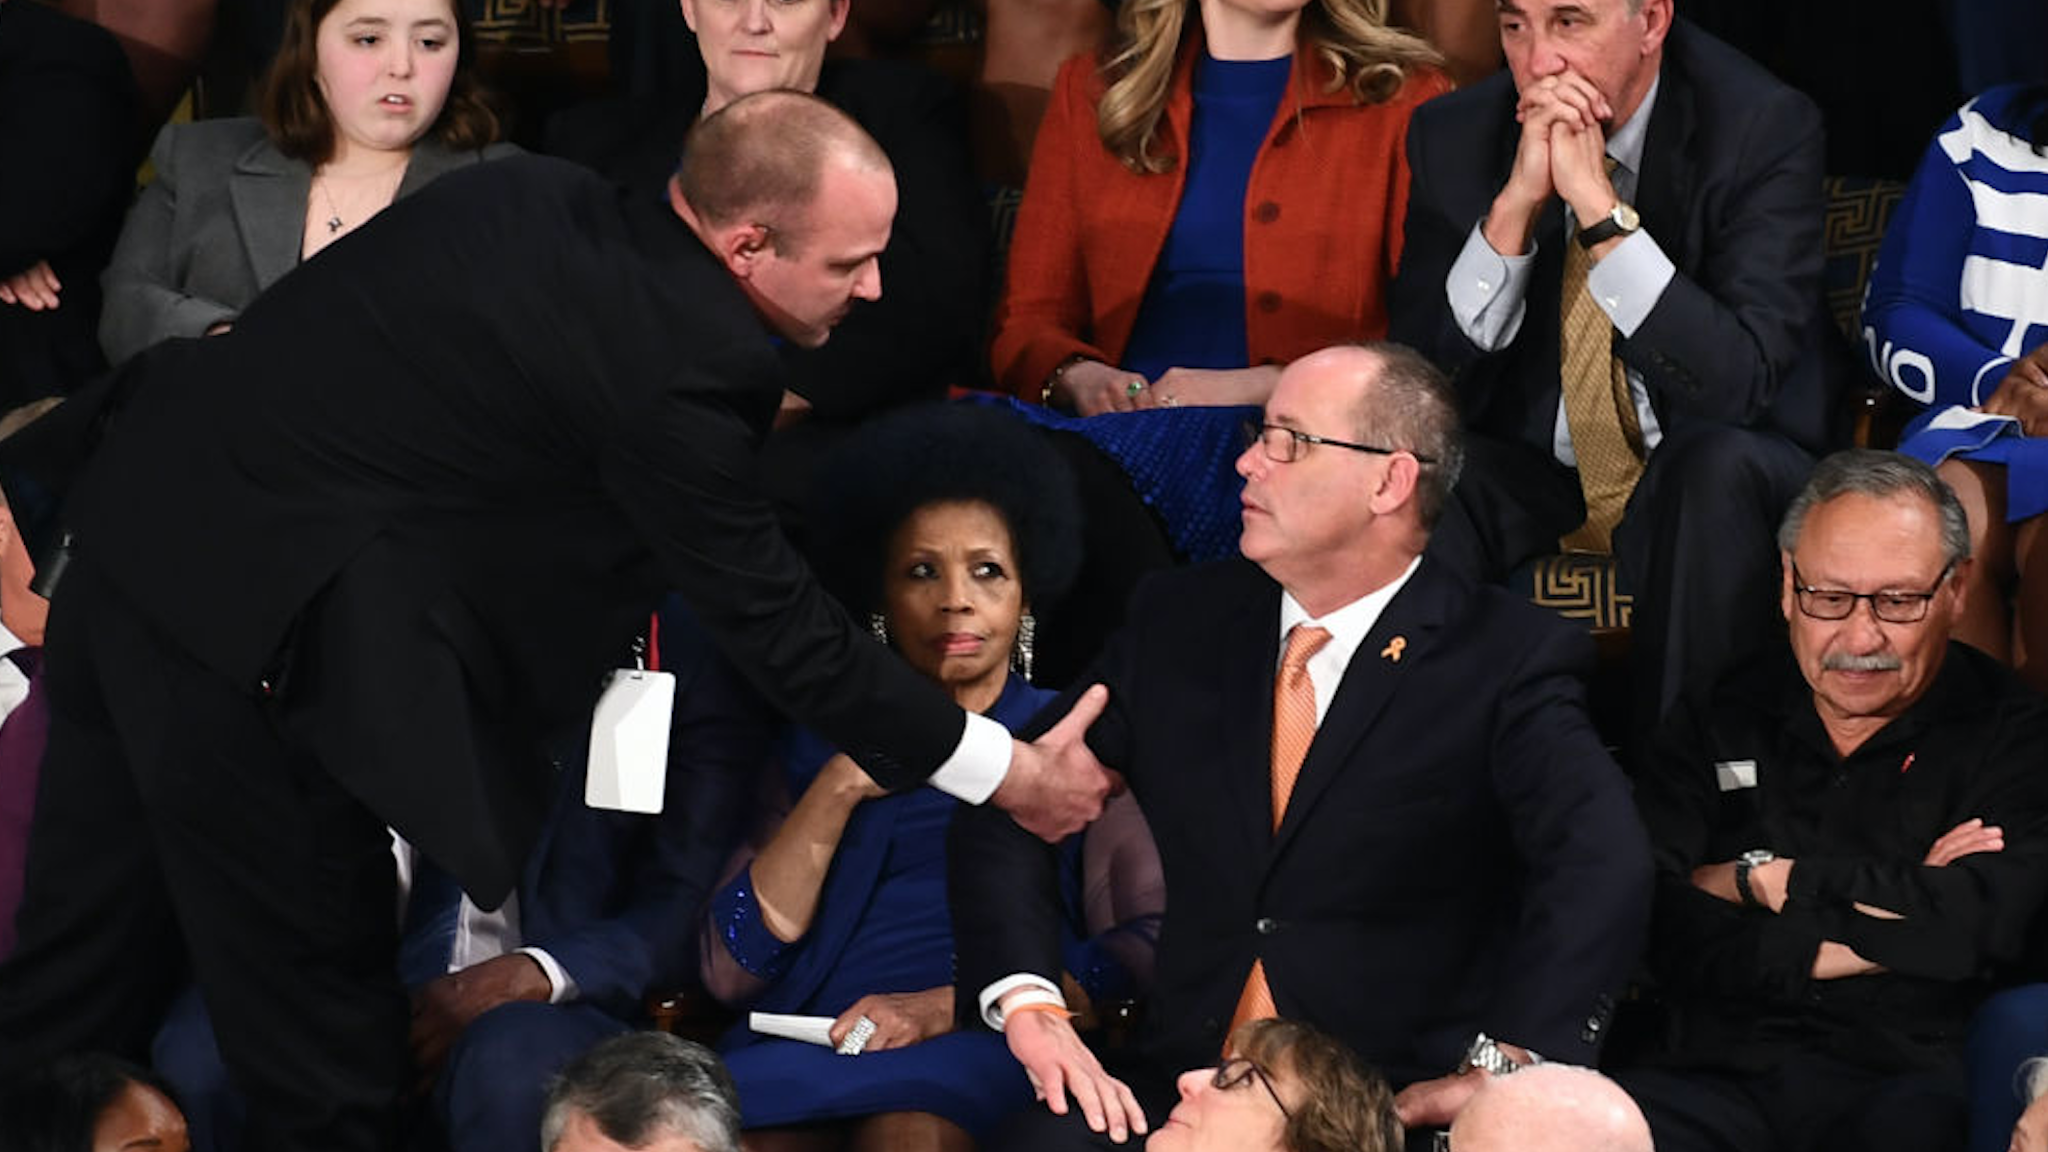 Fred Guttenberg(C), who lost his 14-year-old daughter in the Parkland, Florida, school shooting is removed after yelling during the State of the Union address at the US Capitol in Washington, DC, on February 4, 2020.